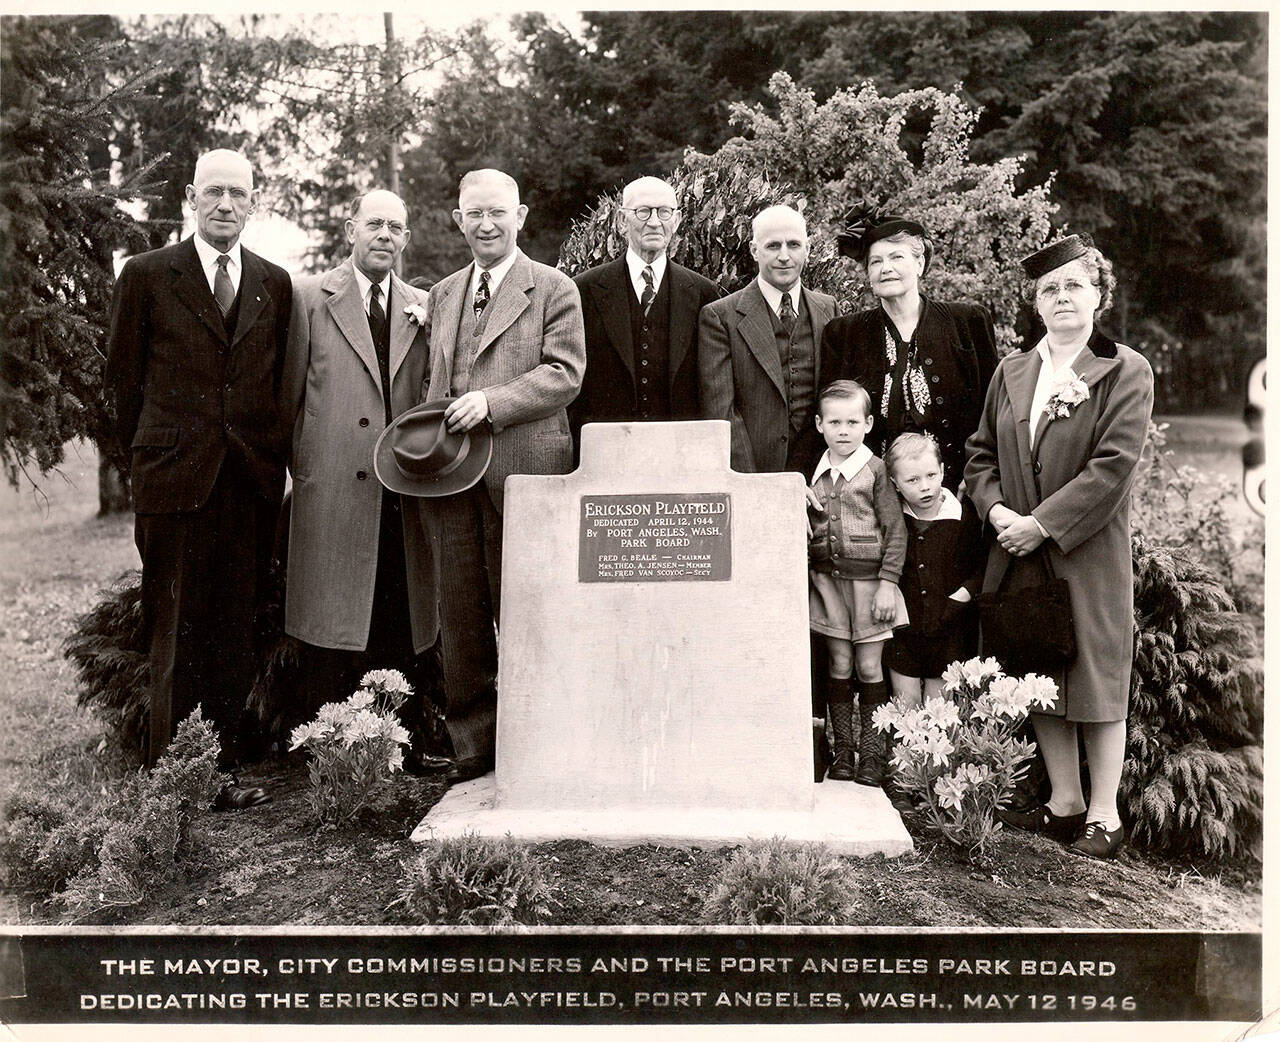 K.O. Erickson stands in the center with Port Angeles mayor’ and members of city commissioners and parks board on May 12, 1946. The plaque reads, “Erickson Playfield, Dedicatied April 12, 1944, by Port Angeles, Wash. Parks Board”. (Courtesy of North Olympic History Center)